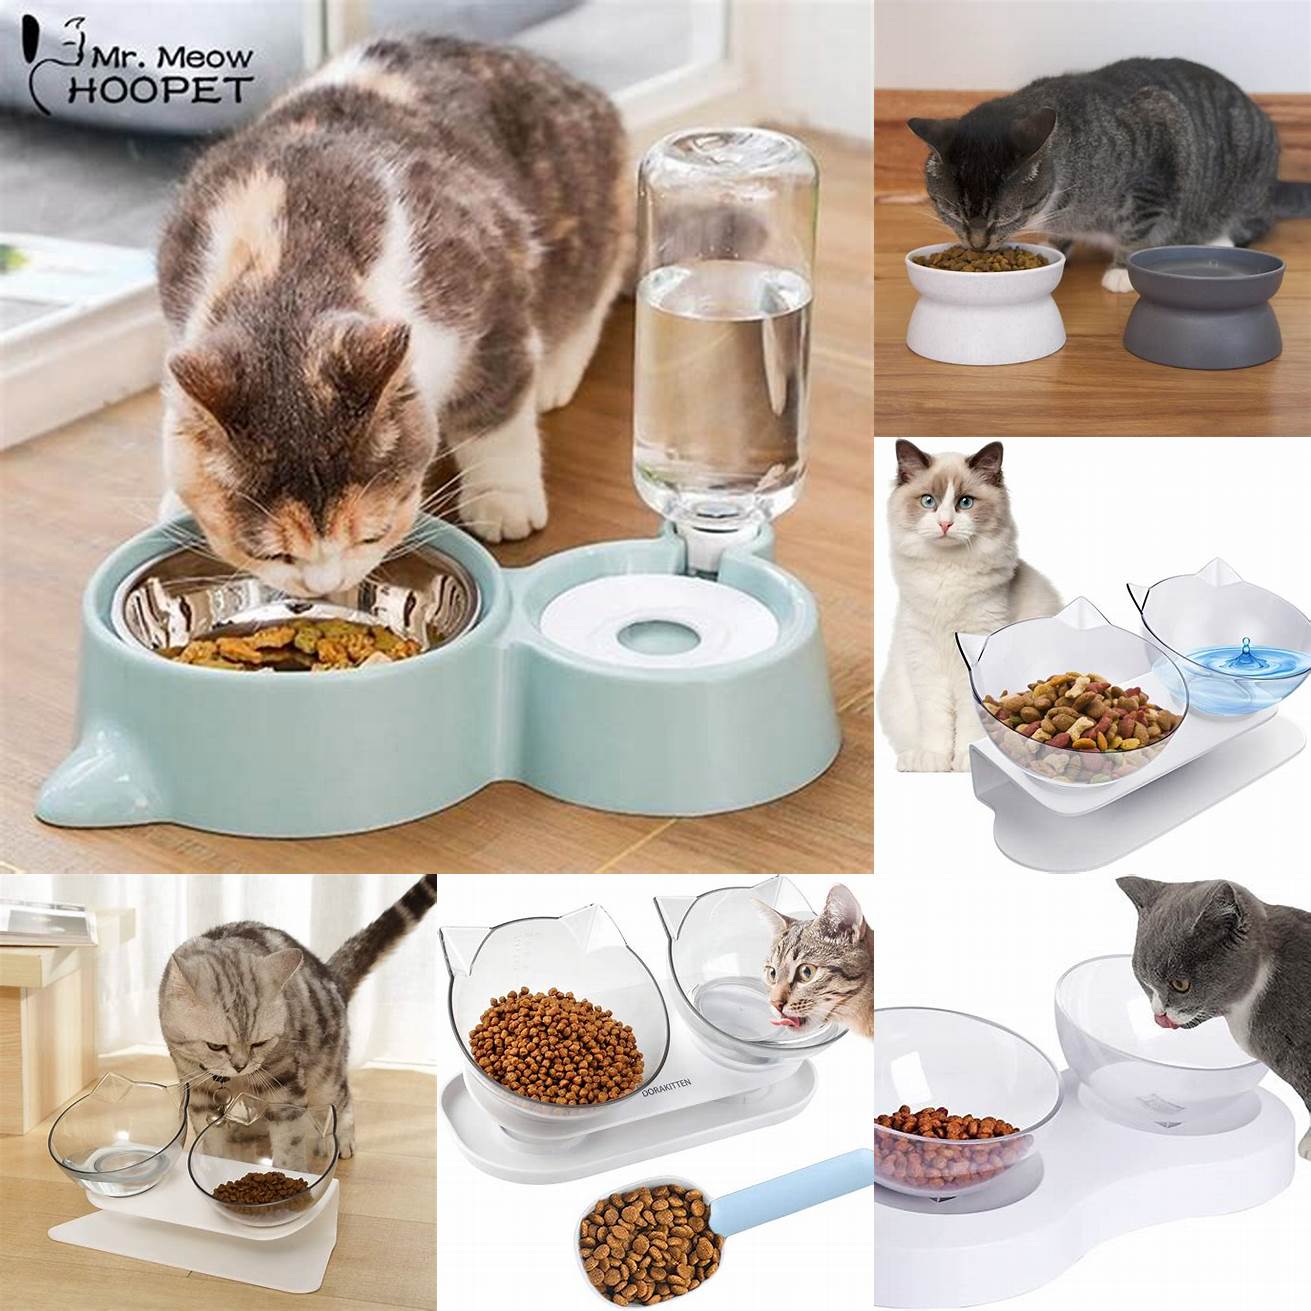 Change food and water bowls